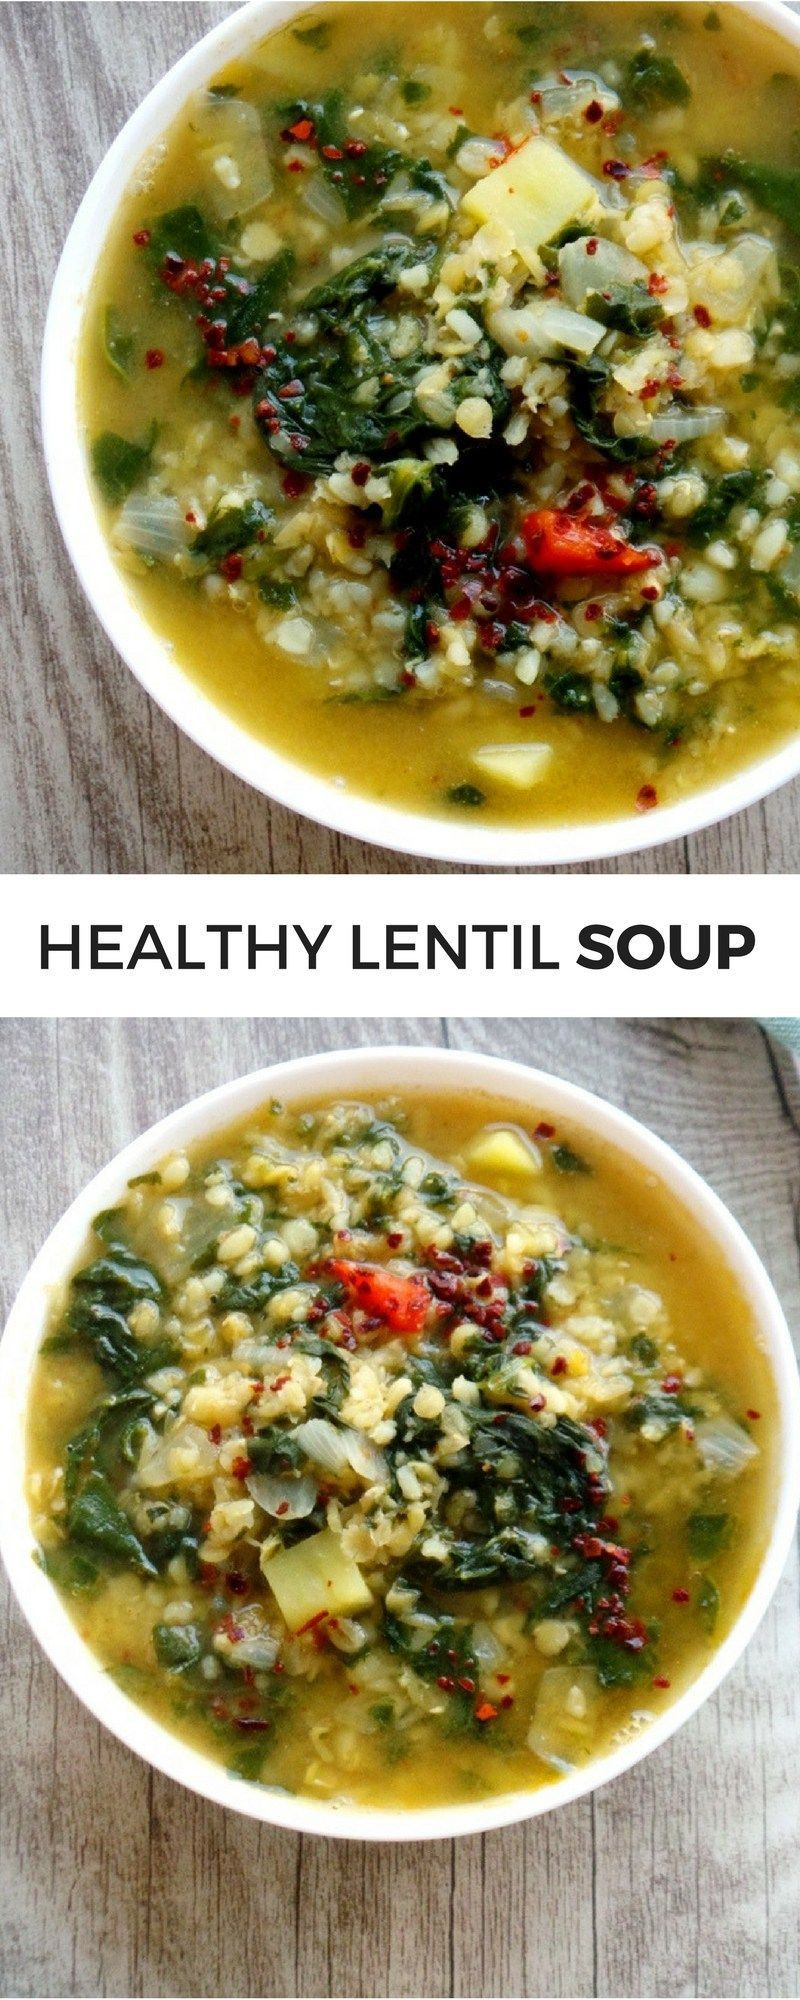 High Fiber Soup Recipes
 Super tasty healthy lentil soup with bulgur and spinach